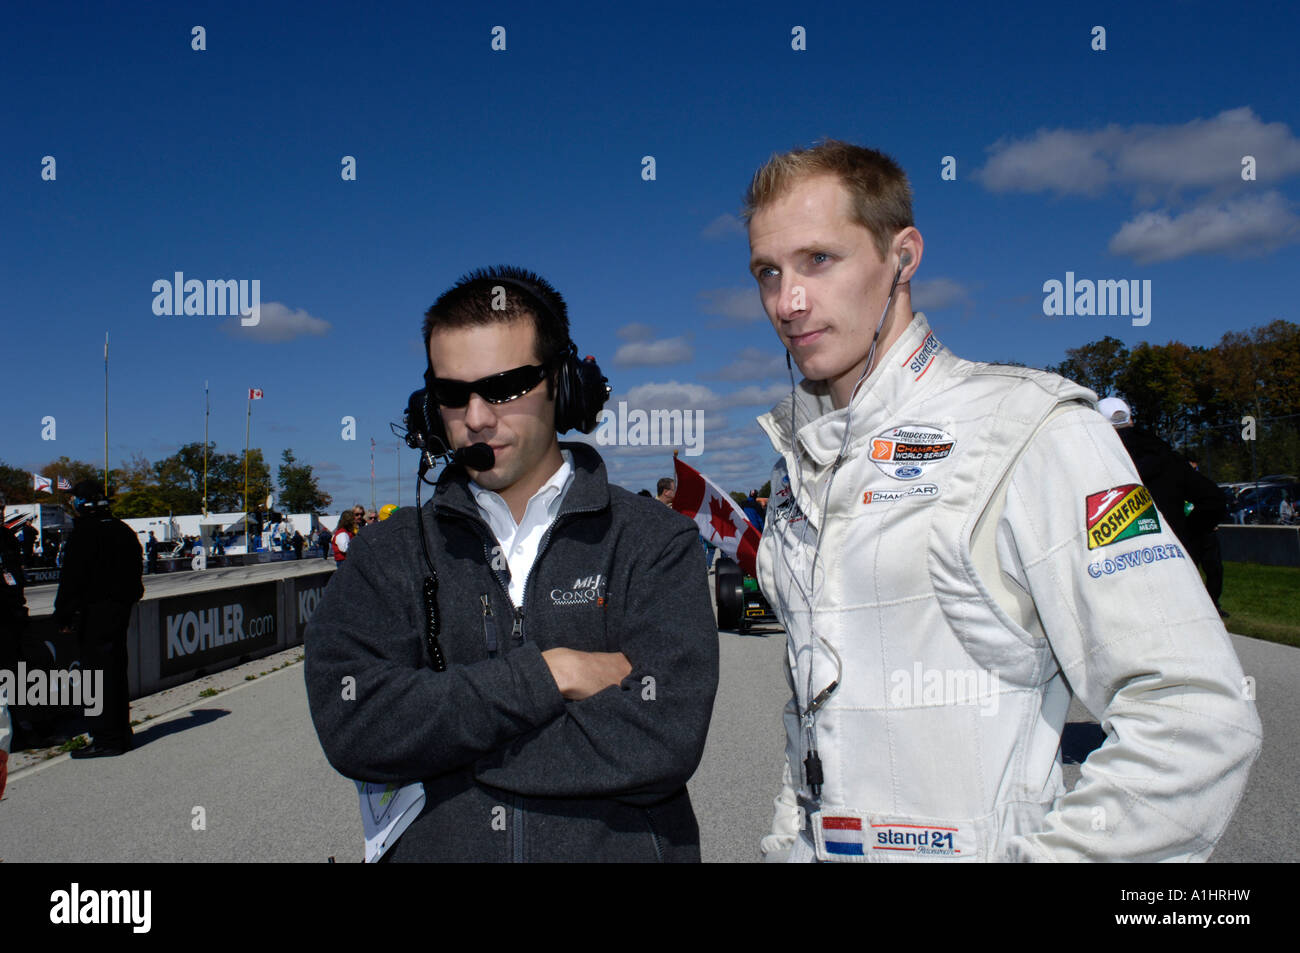 Charles Zwolsman with a crewman at the Champ Car Grand Prix of Road America 2006 Stock Photo